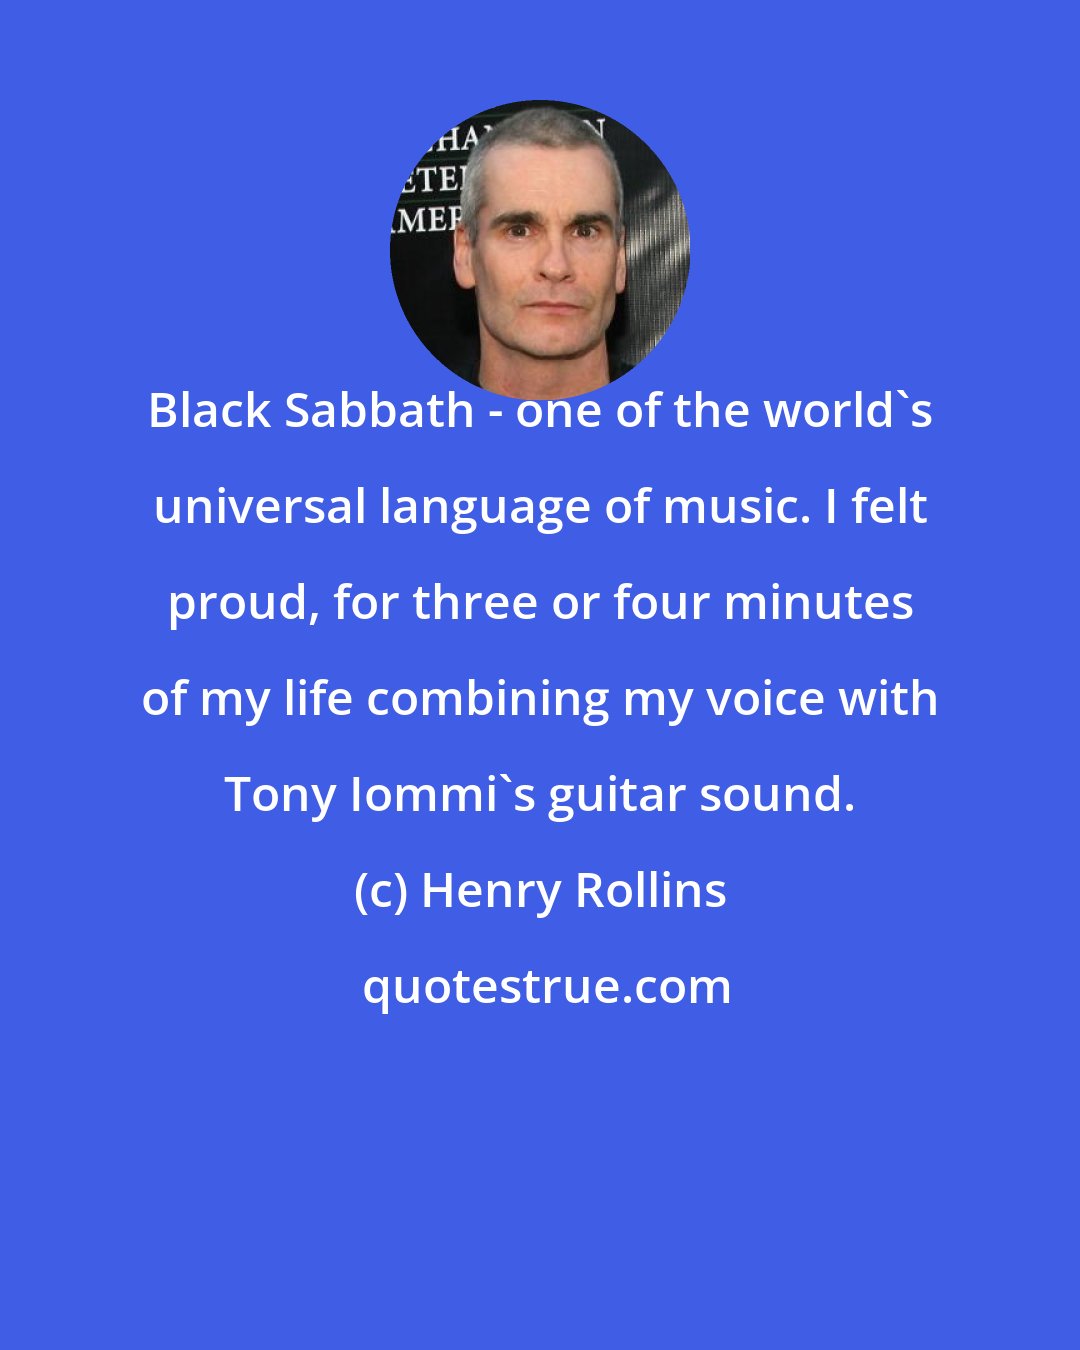 Henry Rollins: Black Sabbath - one of the world's universal language of music. I felt proud, for three or four minutes of my life combining my voice with Tony Iommi's guitar sound.